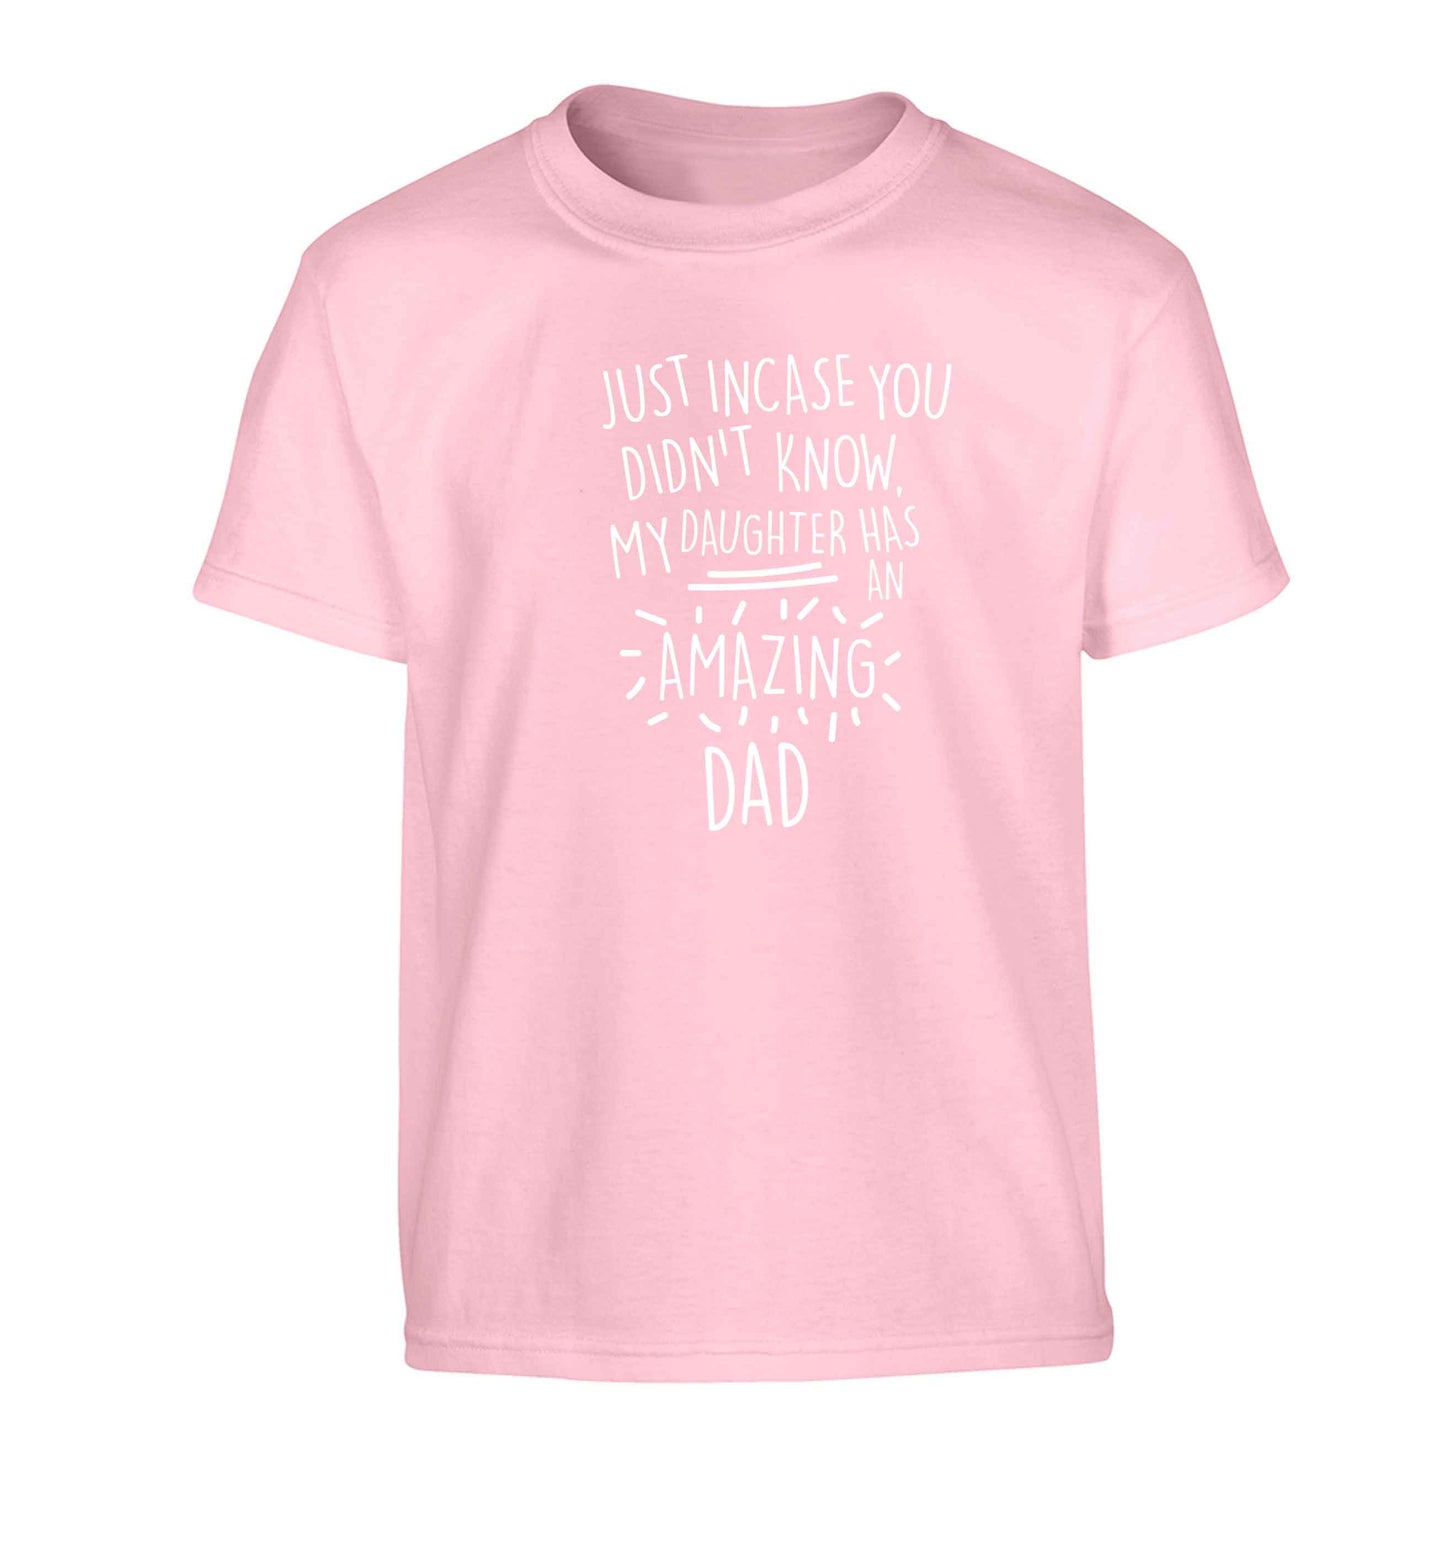 Just incase you didn't know my daughter has an amazing dad Children's light pink Tshirt 12-13 Years